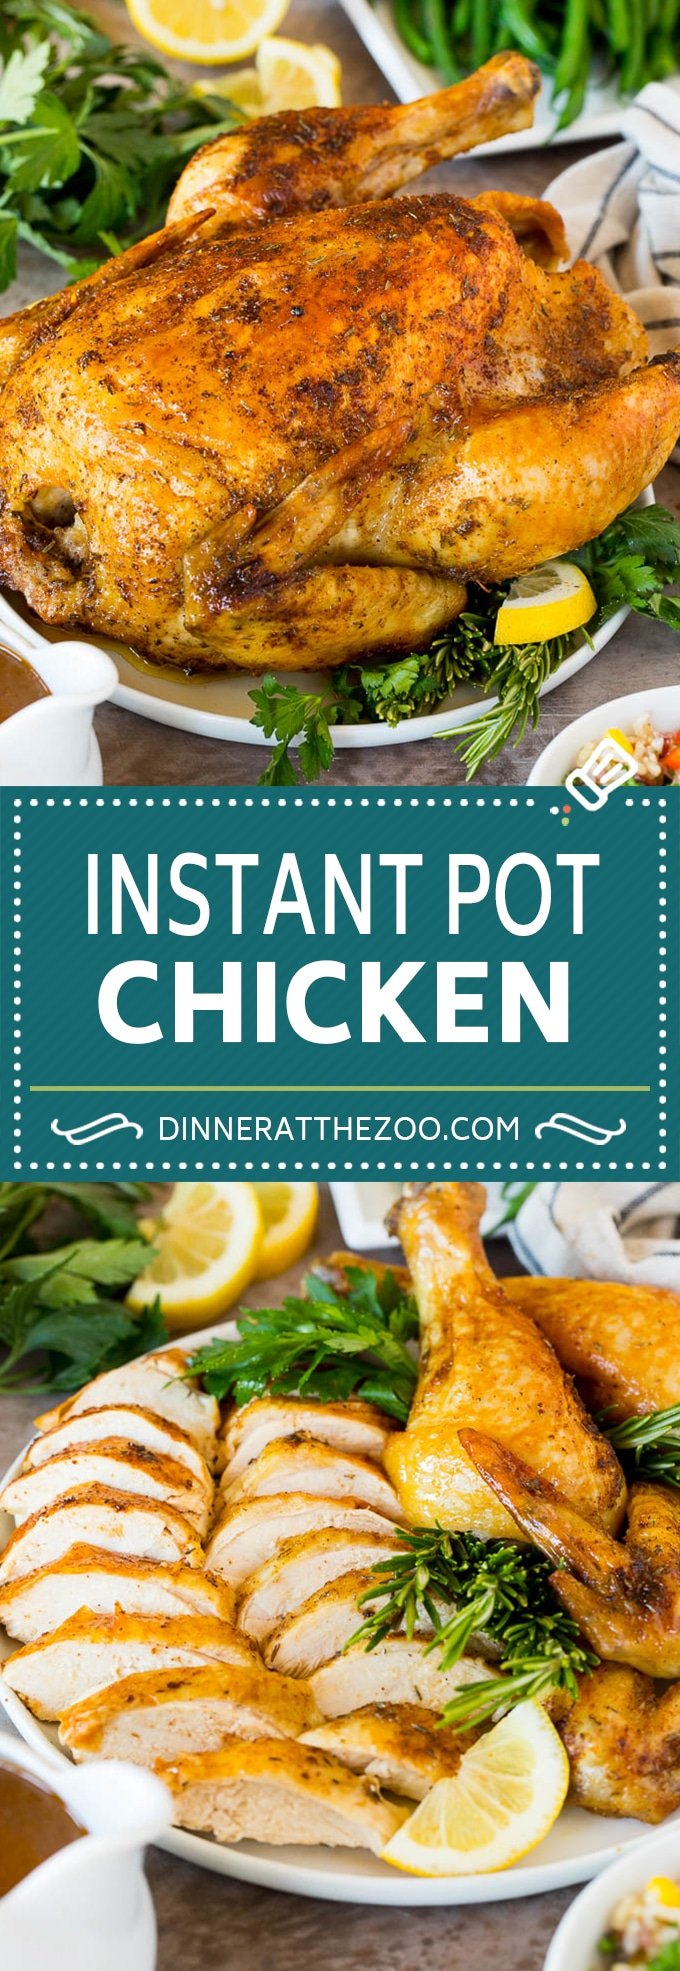 This Instant Pot whole chicken is coated in butter, herbs and spices, then pressure cooked to tender and juicy perfection.